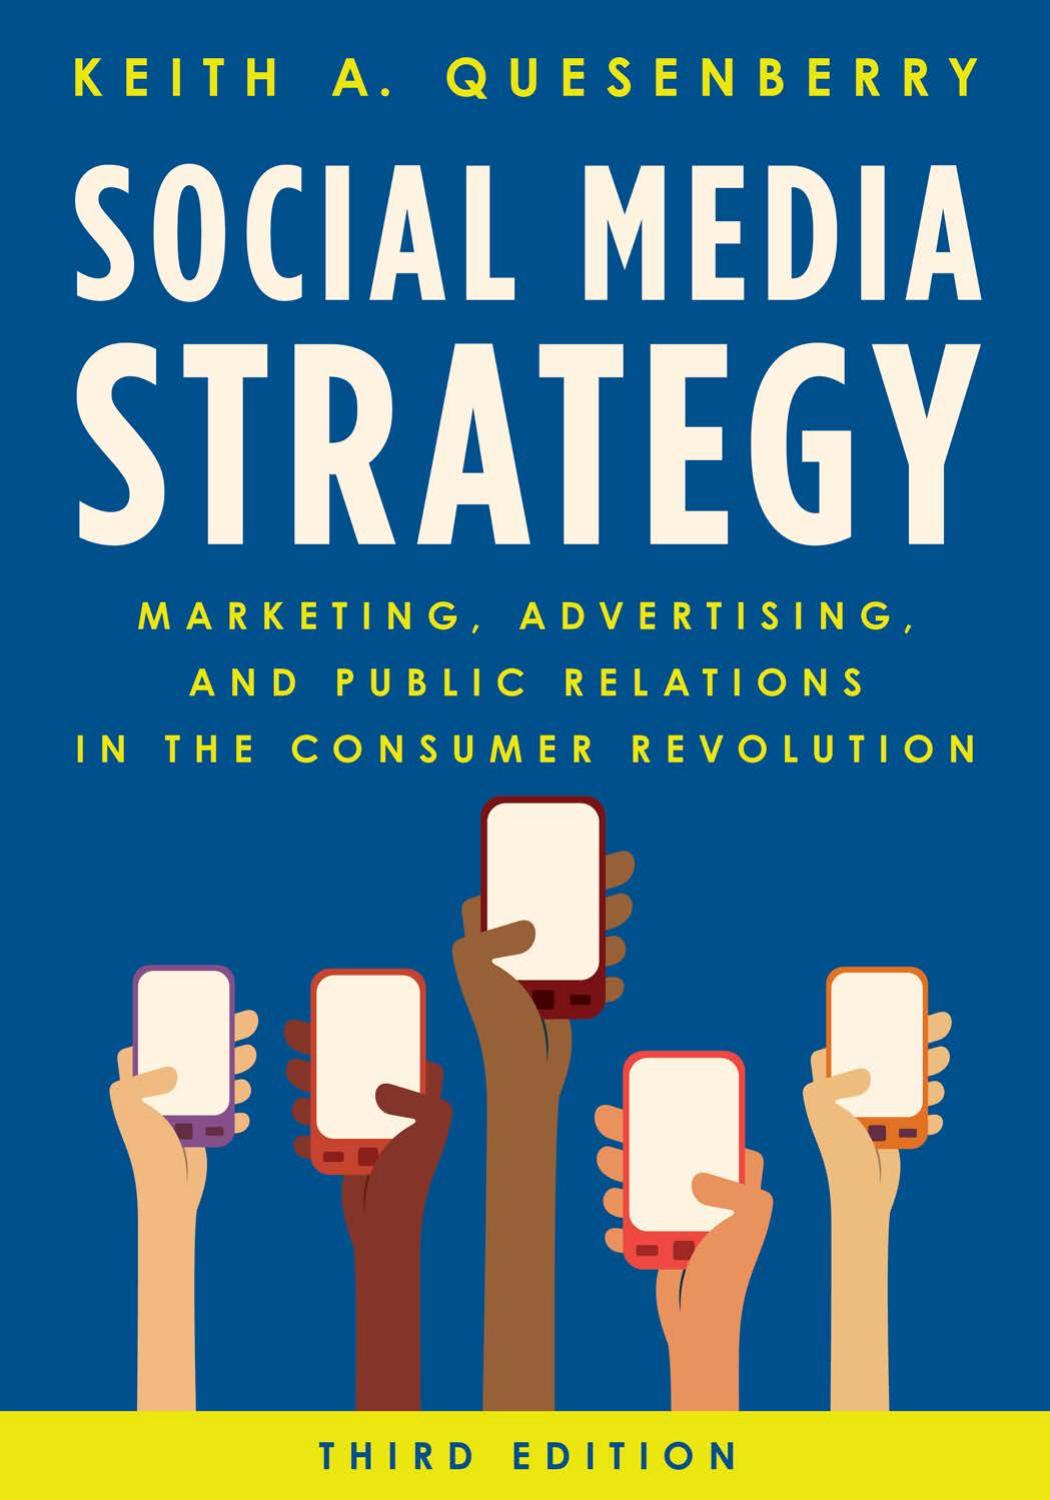 Social Media Strategy Marketing, Advertising Third Edition by Keith A Quesenberry